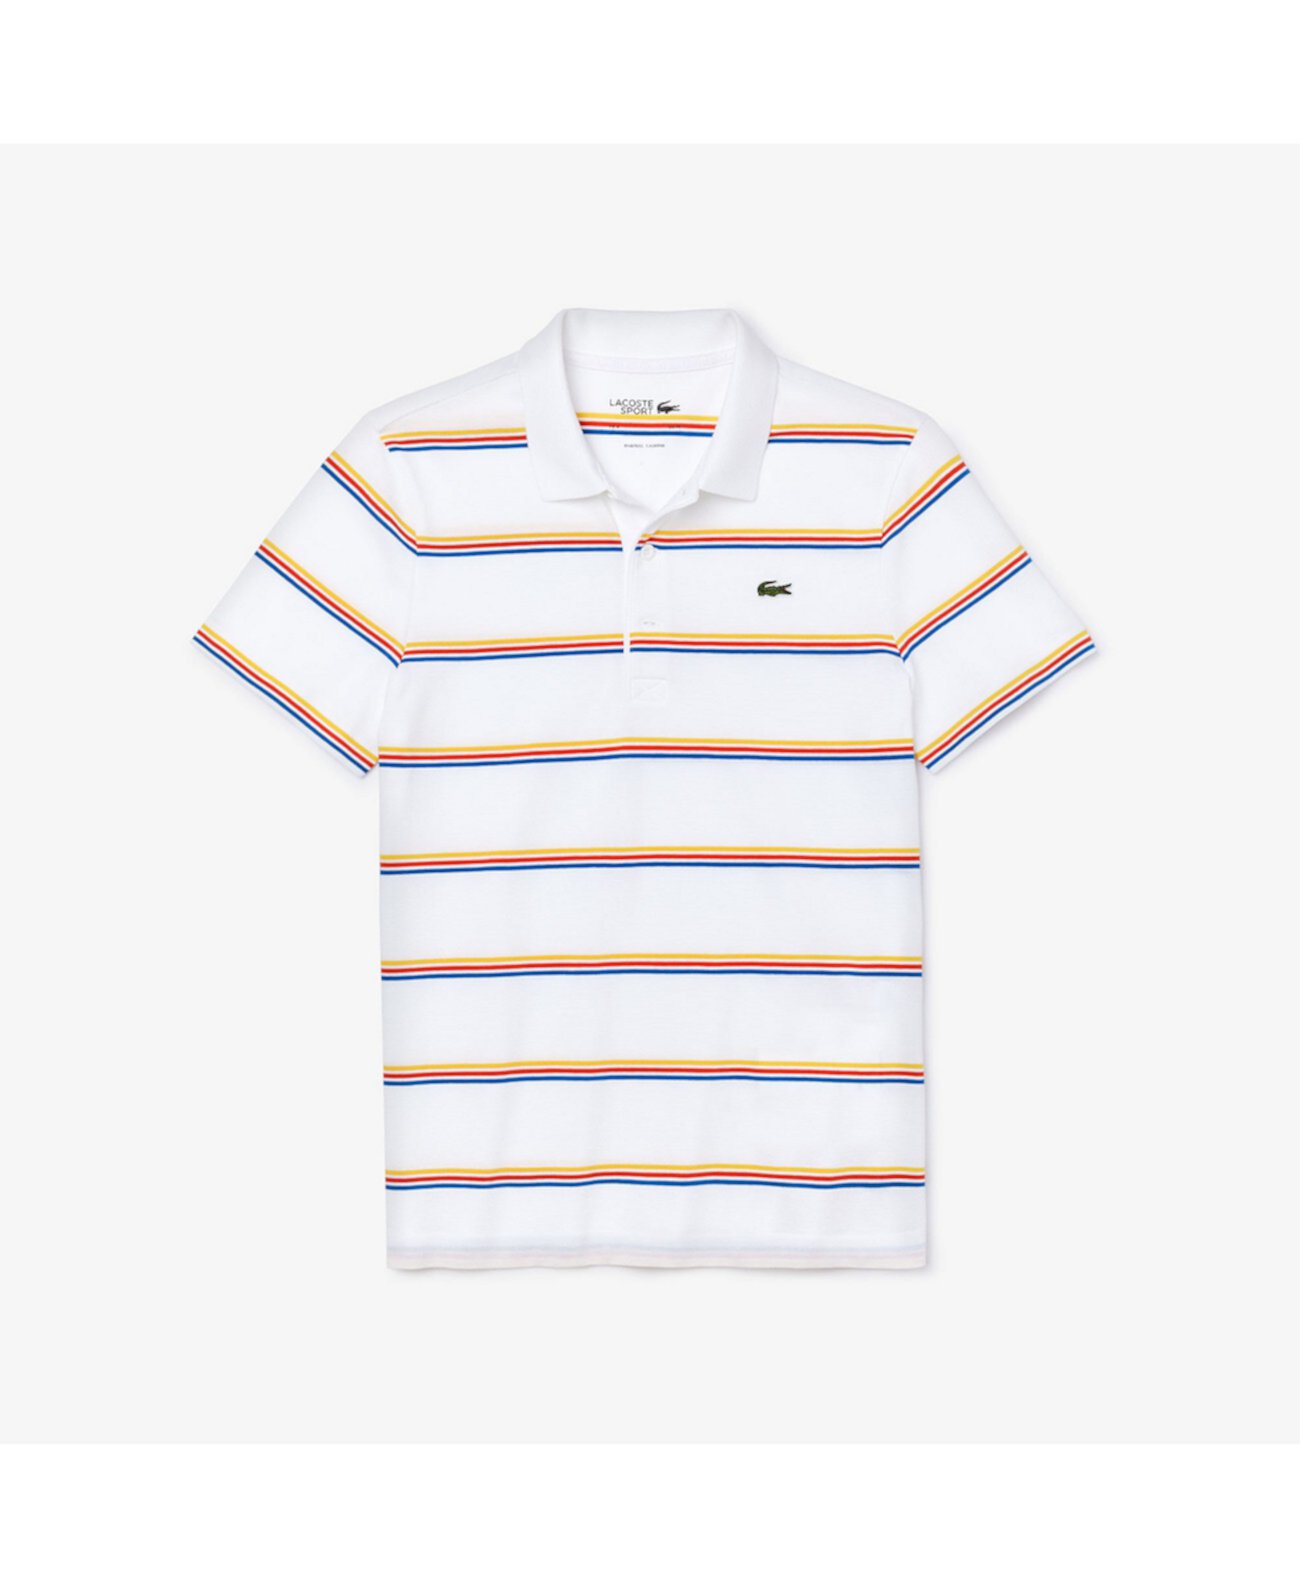 Men's SPORT Short Sleeve Polo Shirt with Tricolor Horizontal Stripes Lacoste